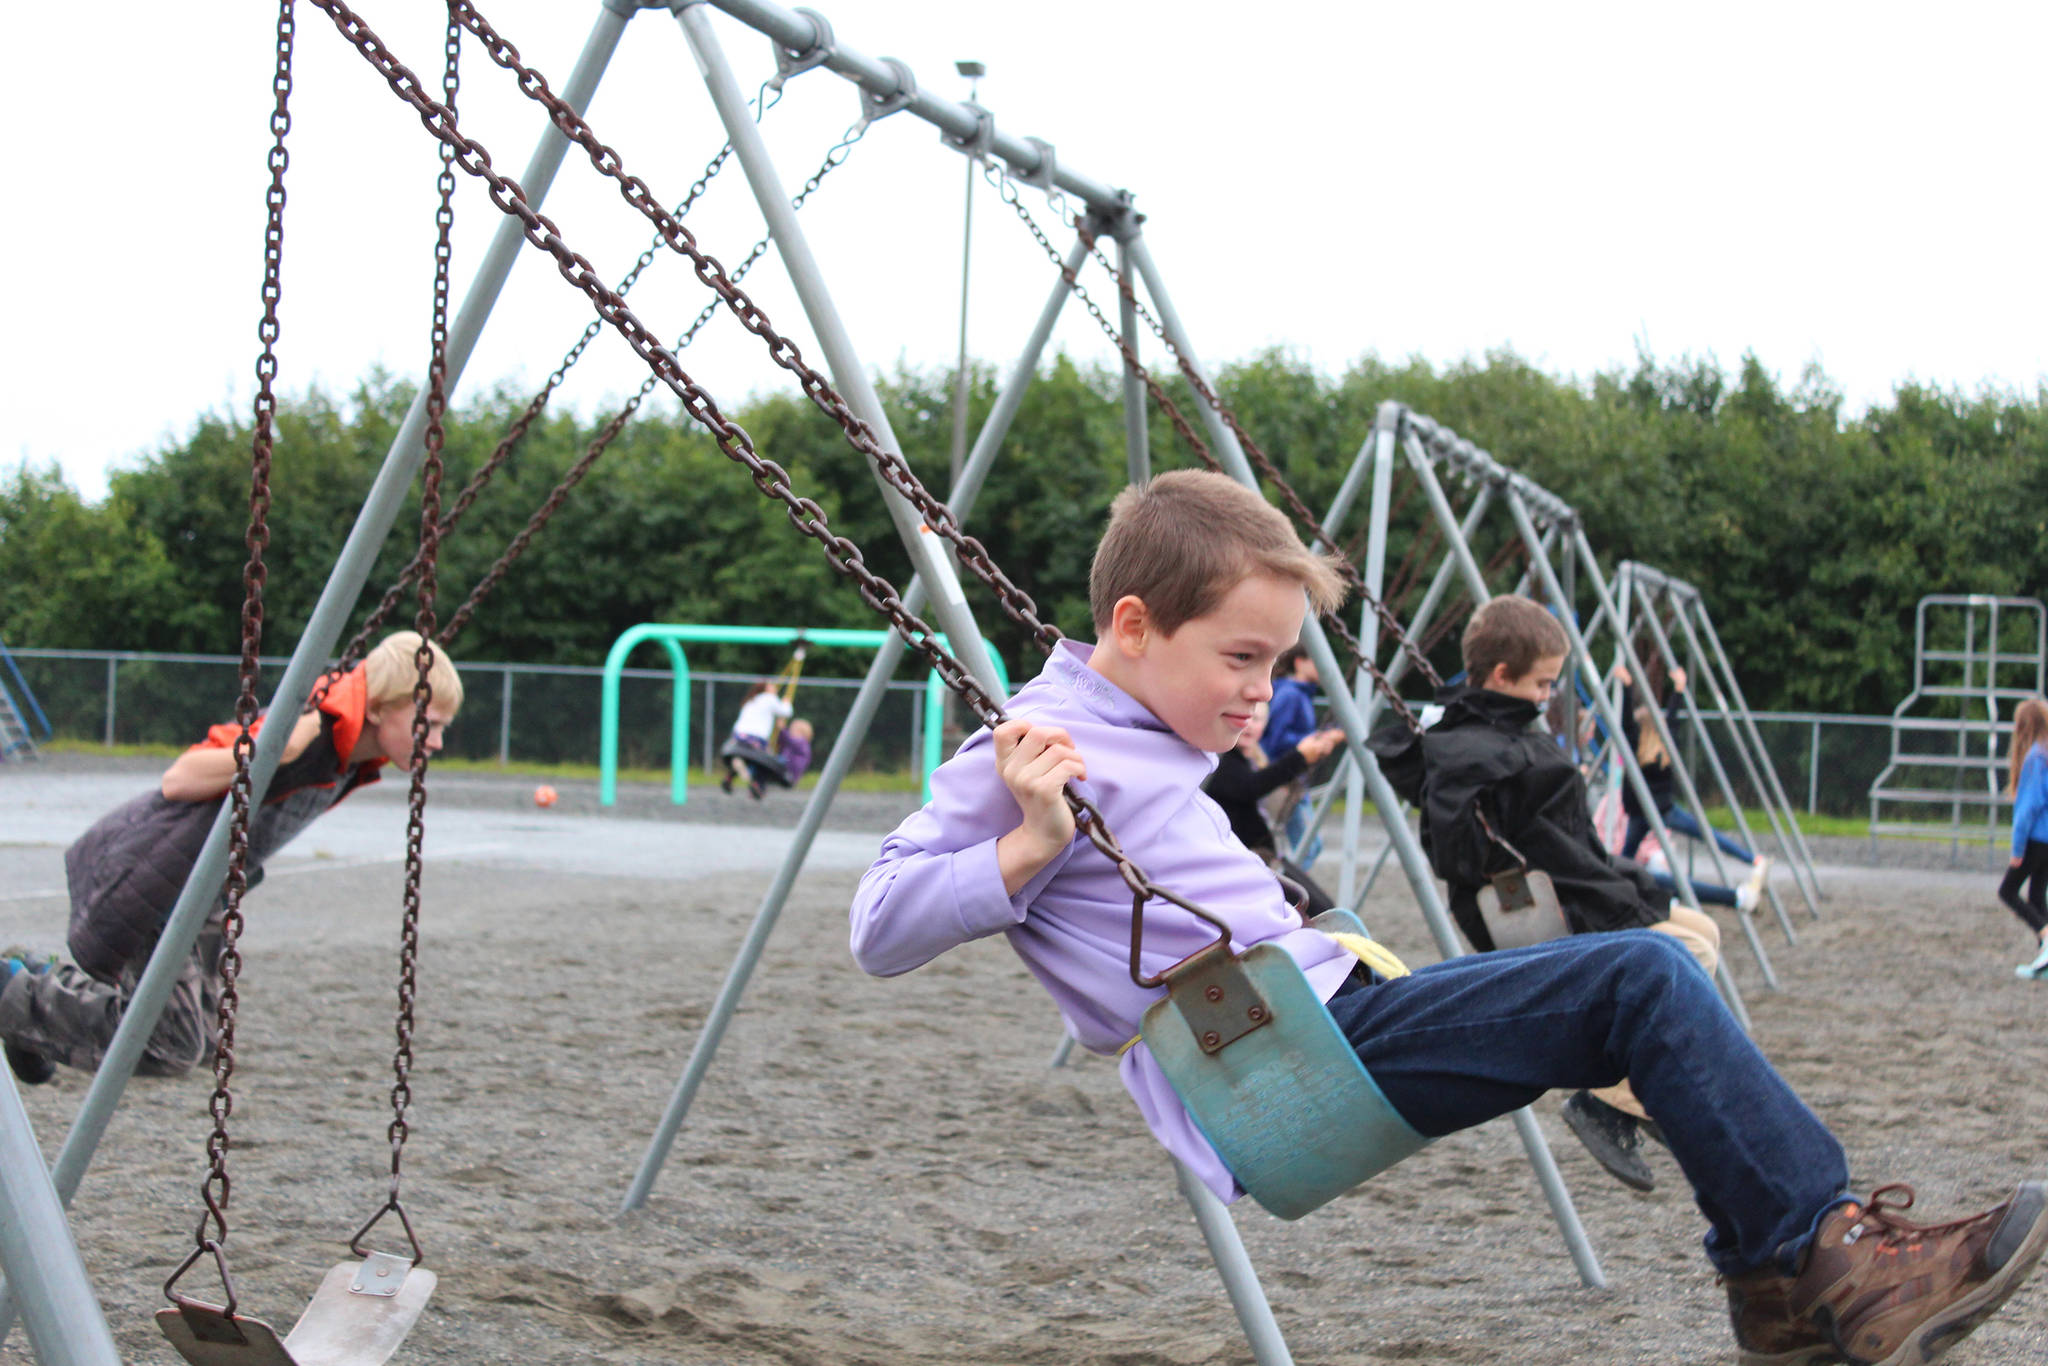 Daniel Kulikov works on his swinging form during recess on the first day of school at West Homer Elementary, on Tuesday, Aug. 21, 2018 at the school in Homer, Alaska. (Photo by Megan Pacer/Homer News)